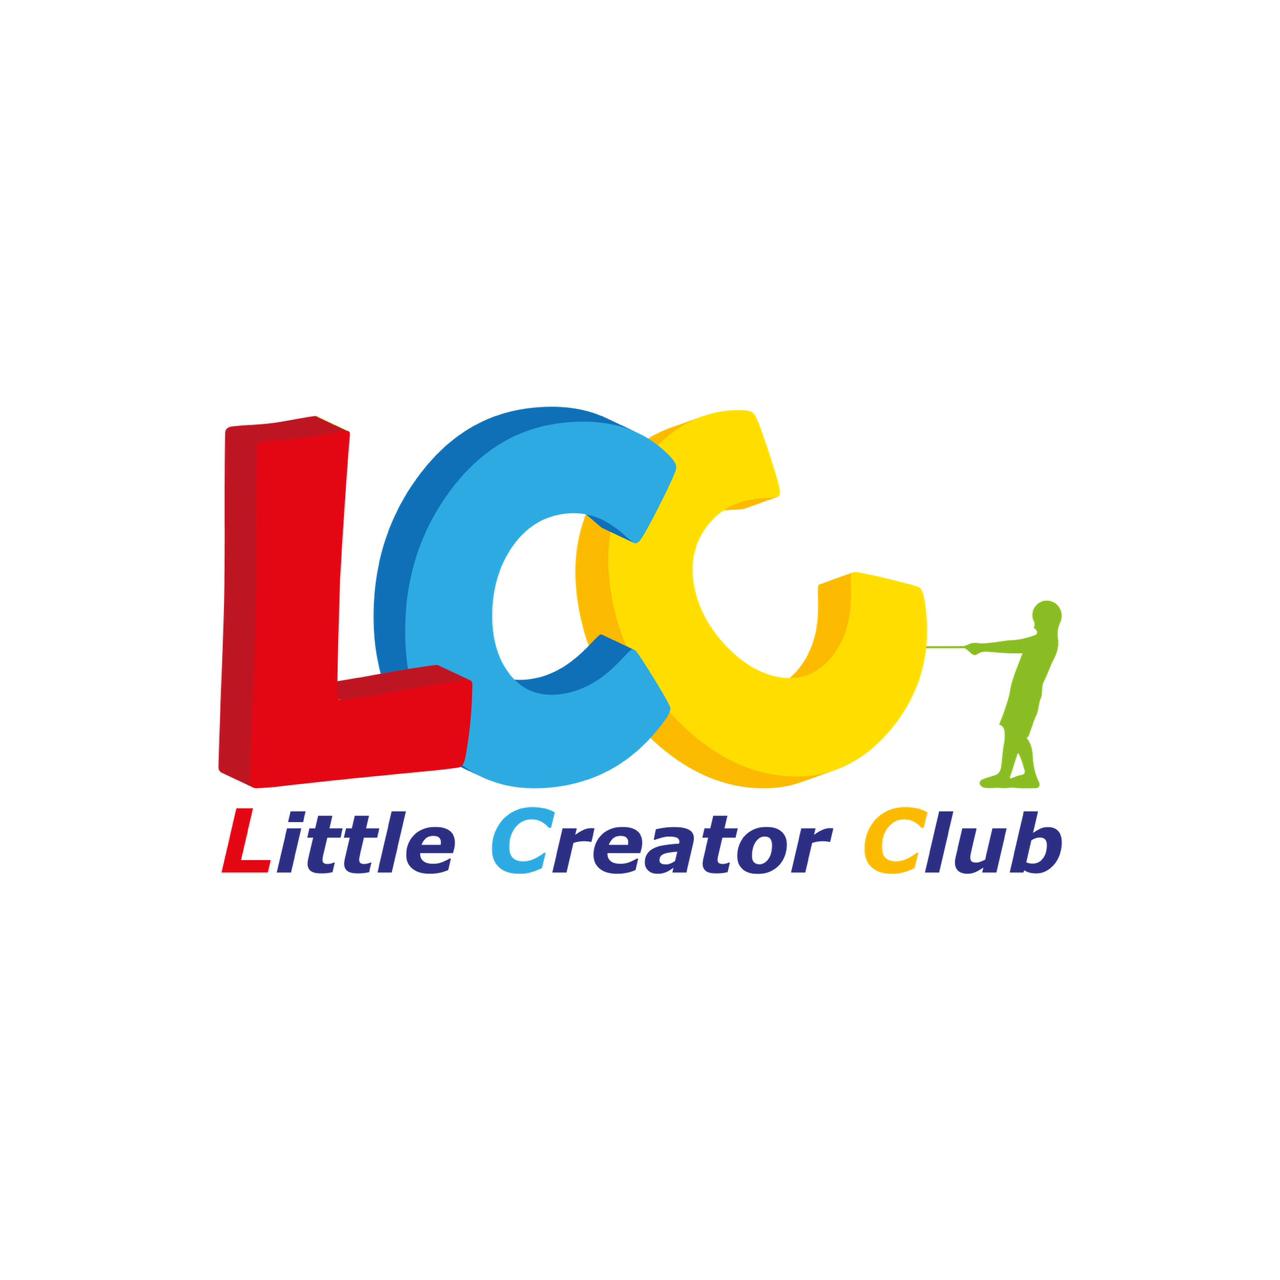 Little Creator Club, one of the best and most renowned Kids centres in Lebanon 23